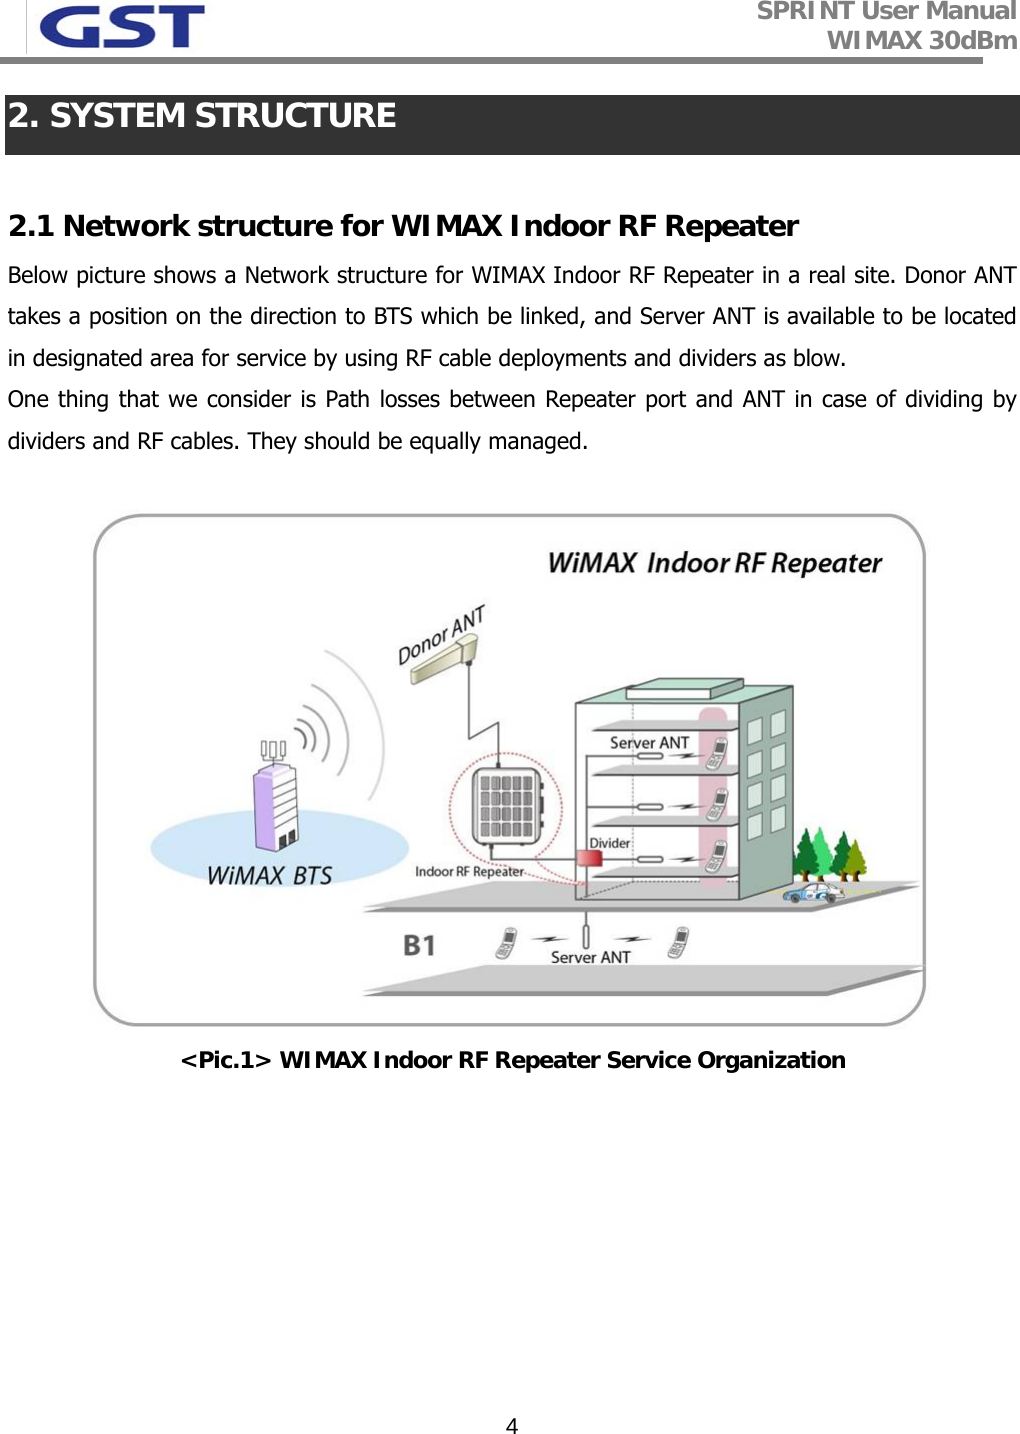 SPRINT User Manual WIMAX 30dBm   42. SYSTEM STRUCTURE  2.1 Network structure for WIMAX Indoor RF Repeater  Below picture shows a Network structure for WIMAX Indoor RF Repeater in a real site. Donor ANT takes a position on the direction to BTS which be linked, and Server ANT is available to be located in designated area for service by using RF cable deployments and dividers as blow.  One thing that we consider is Path losses between Repeater port and ANT in case of dividing by dividers and RF cables. They should be equally managed.   &lt;Pic.1&gt; WIMAX Indoor RF Repeater Service Organization 